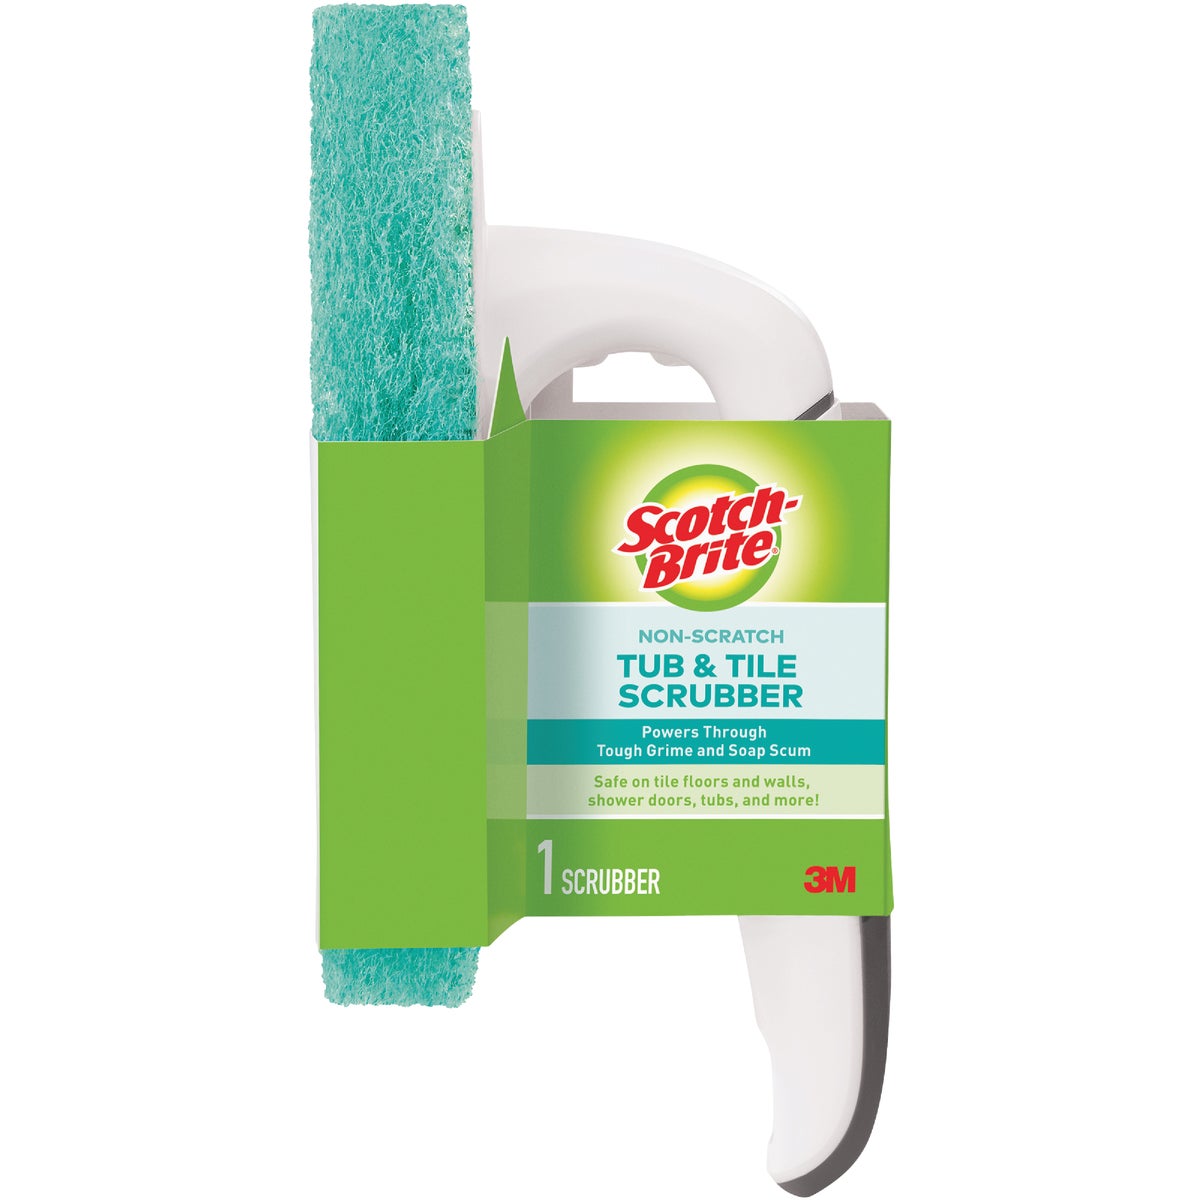  Scotch-Brite Switchable Cleaning Scrubber with Handle